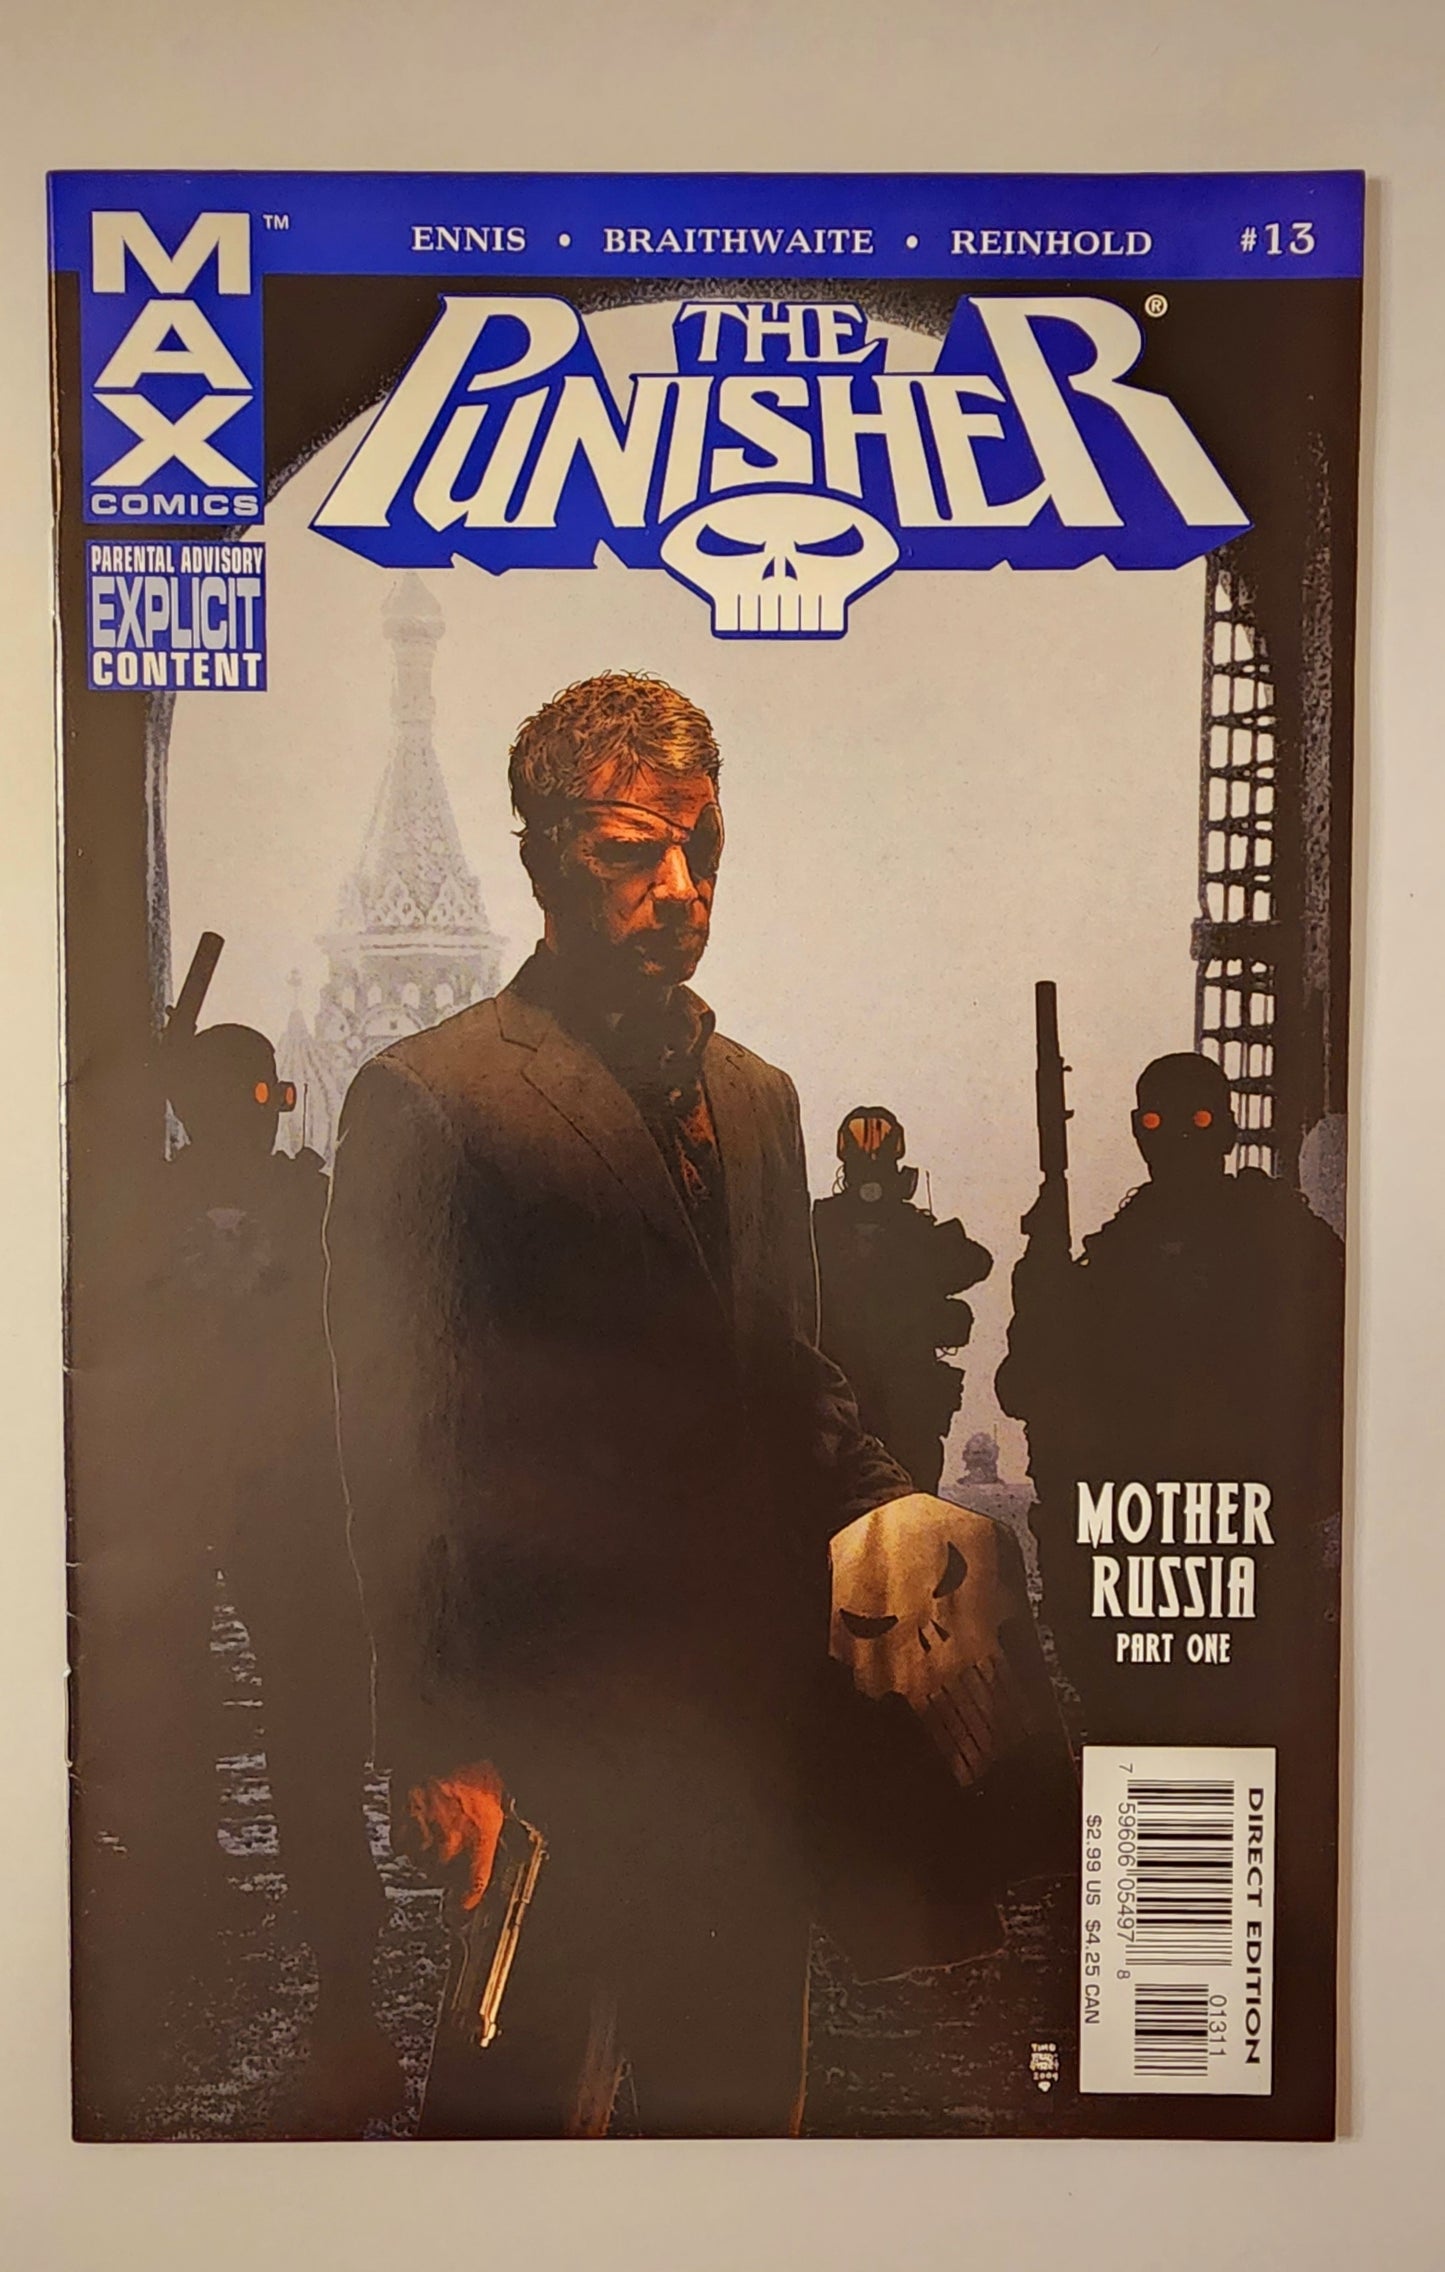 The Punisher (Vol. 7) #13 (FN/VF)